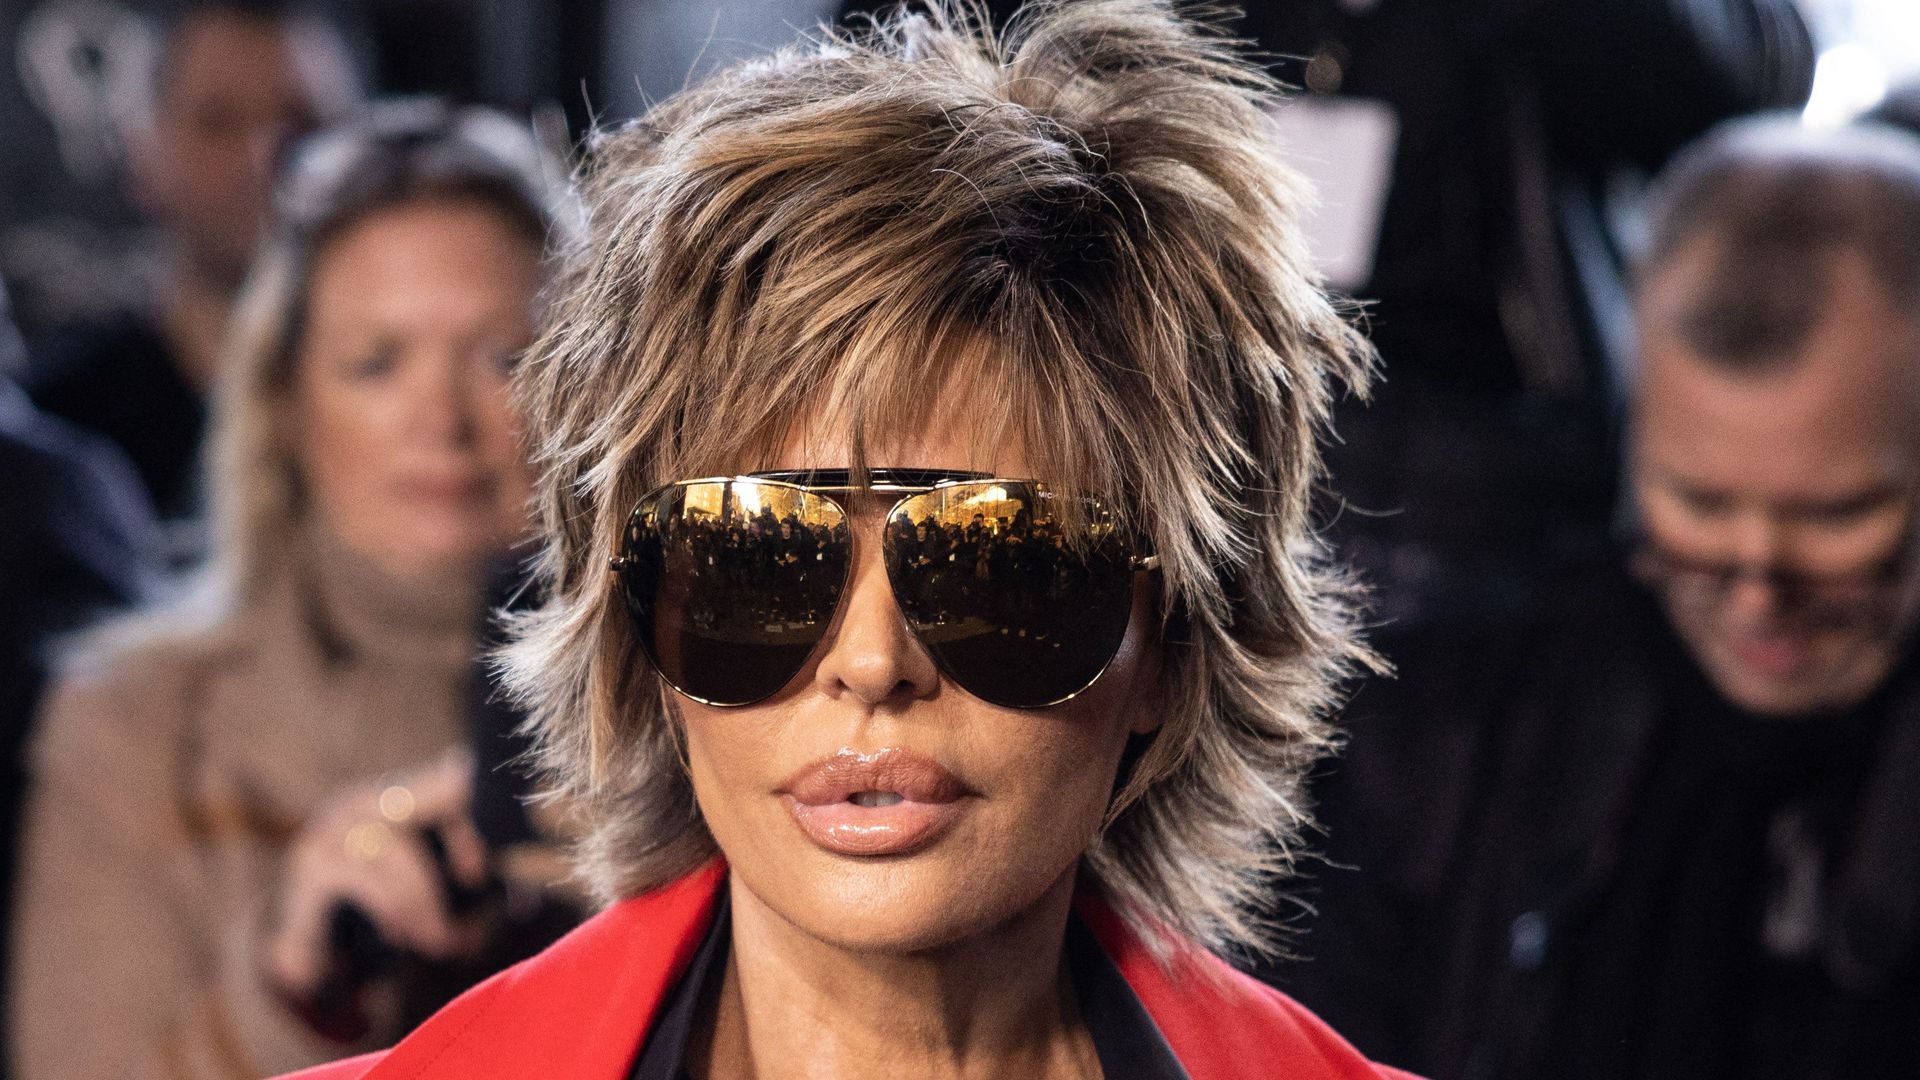 Lisa Rinna in sunglasses and red coat